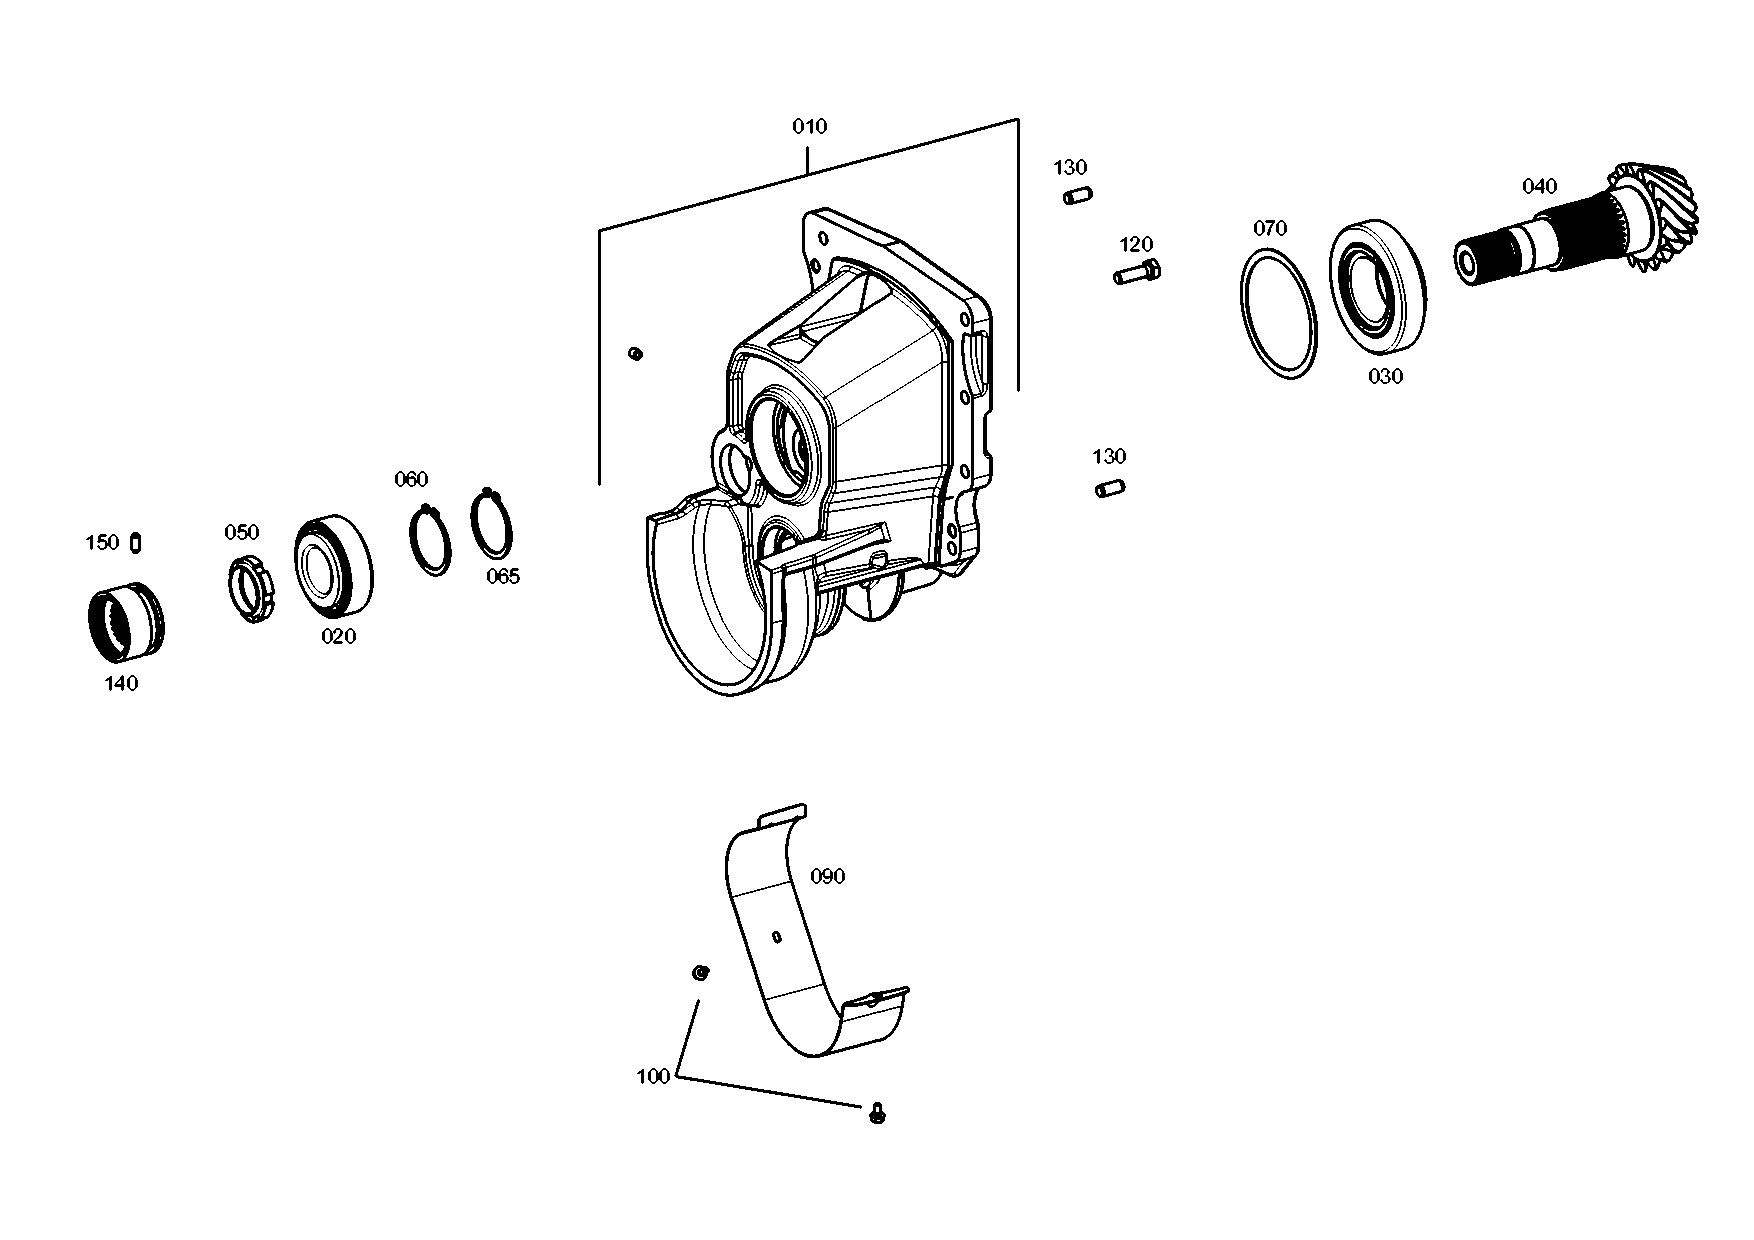 drawing for LUNA EQUIPOS INDUSTRIEALES, S.A. 199118250360 - ADJUSTMENT PLATE (figure 3)